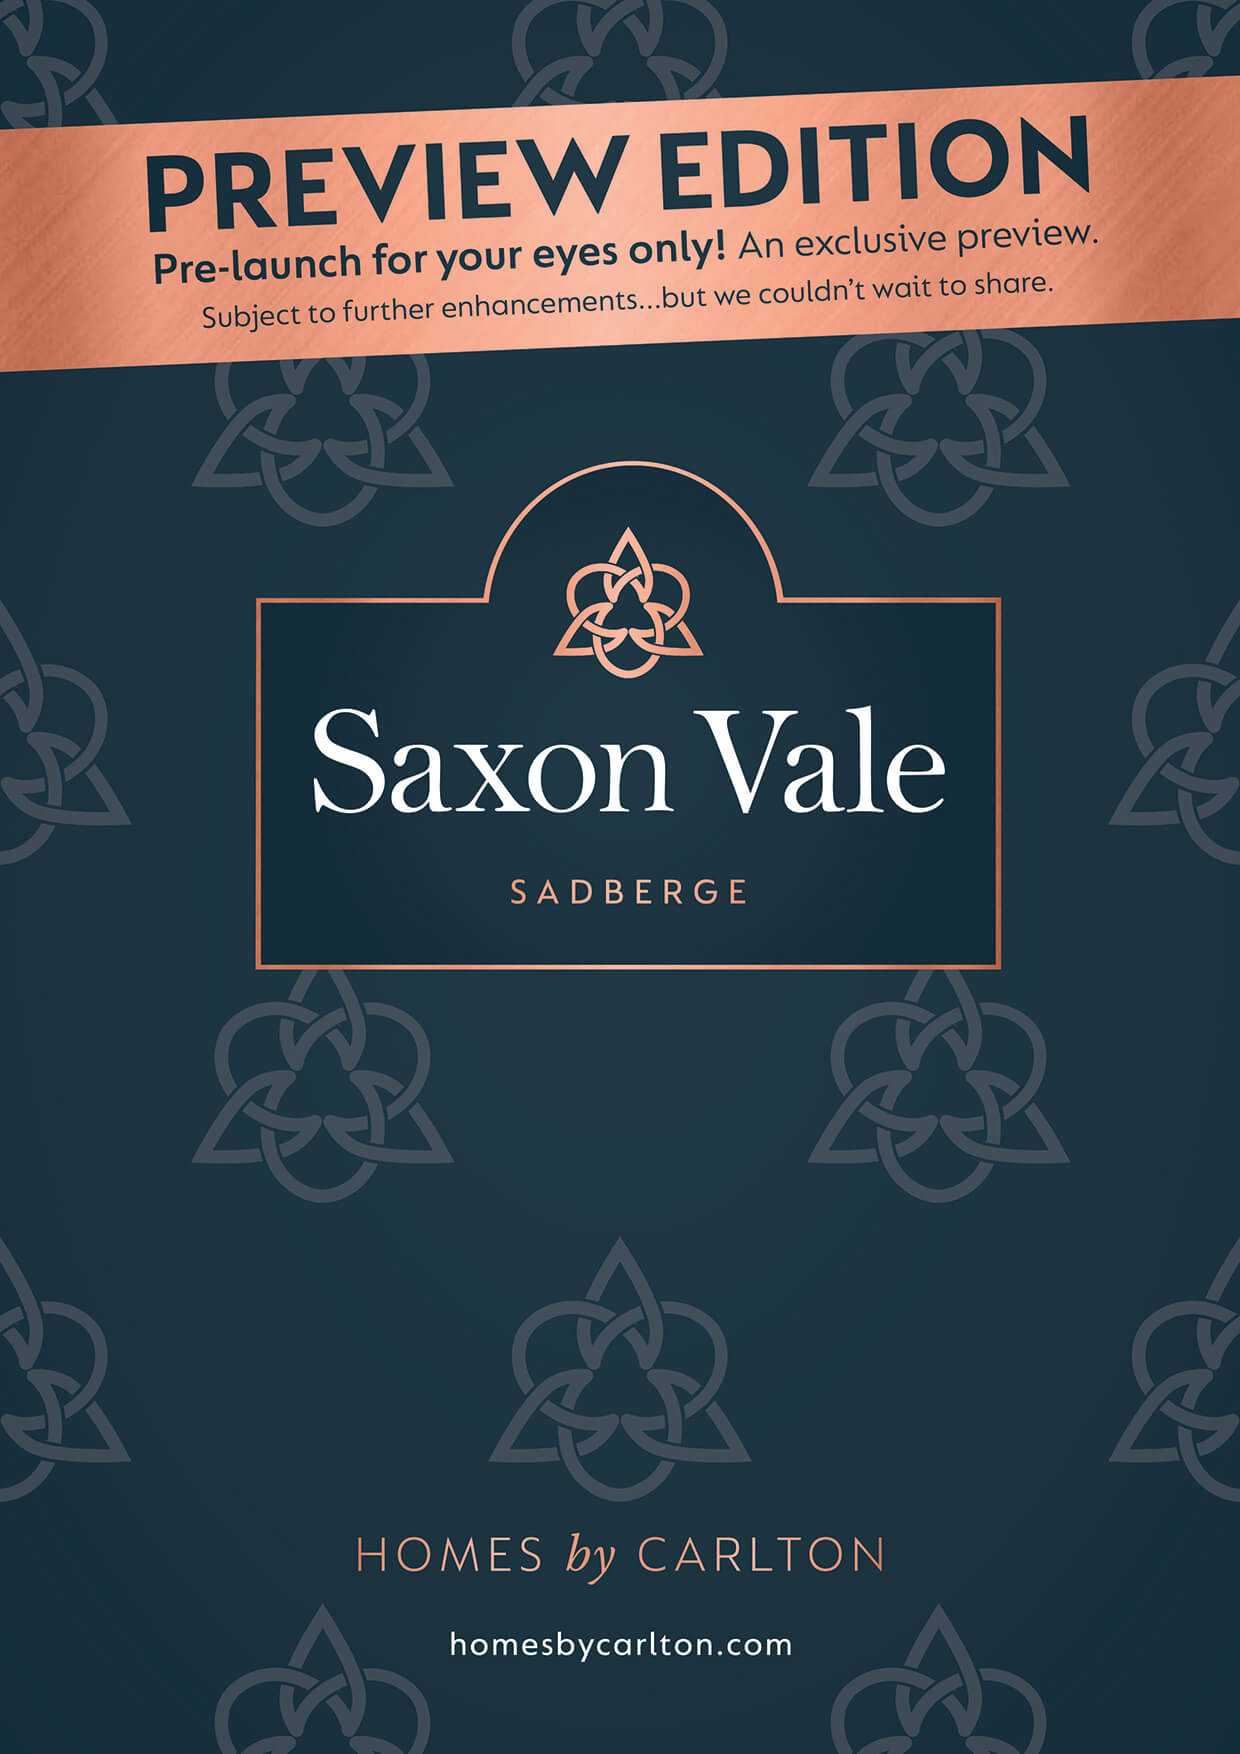 image of saxon vale preview cover